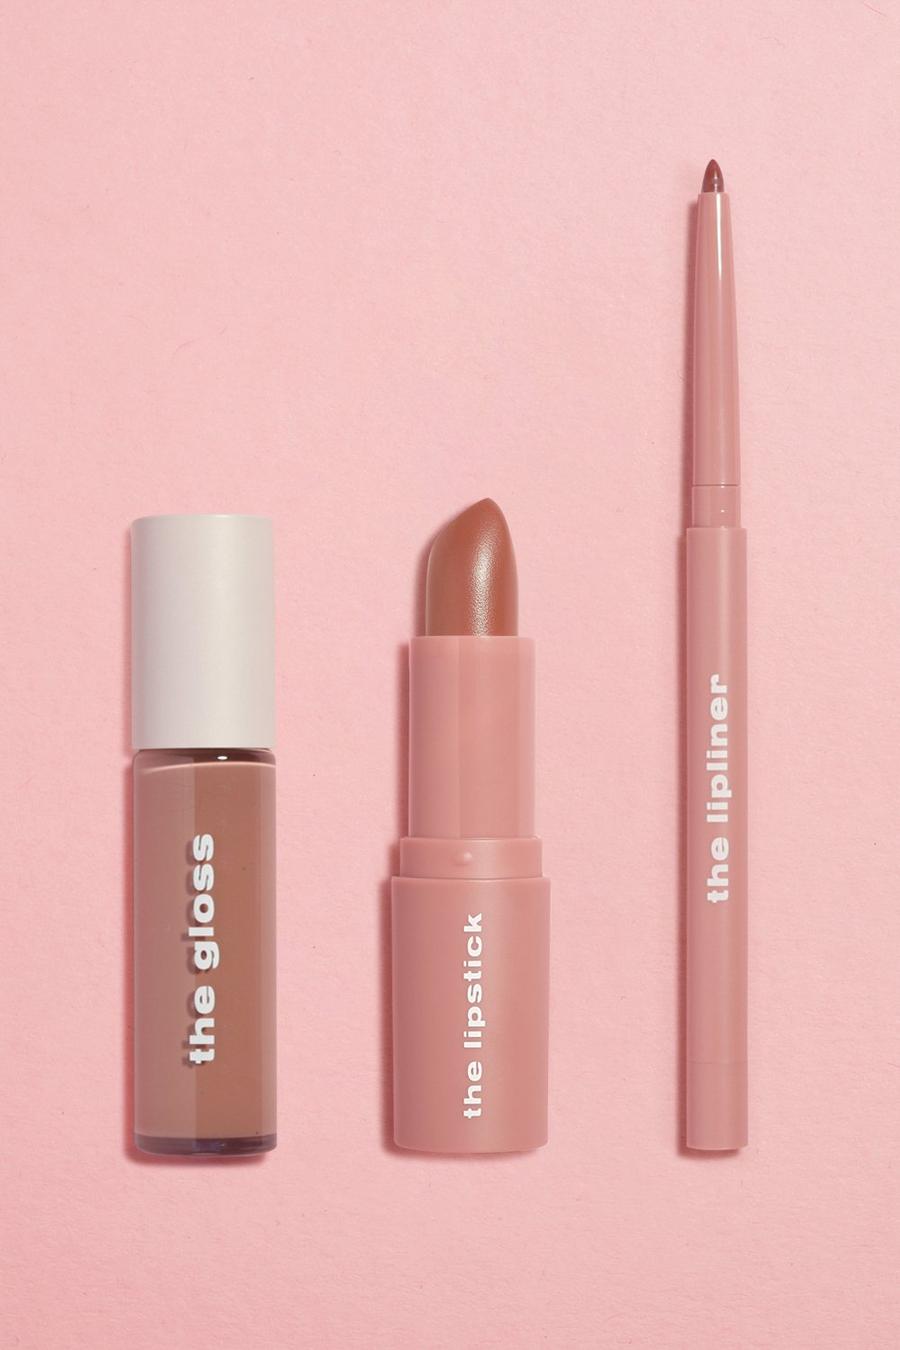 Boohoo Beauty - The Complete Lip - Pale Nude